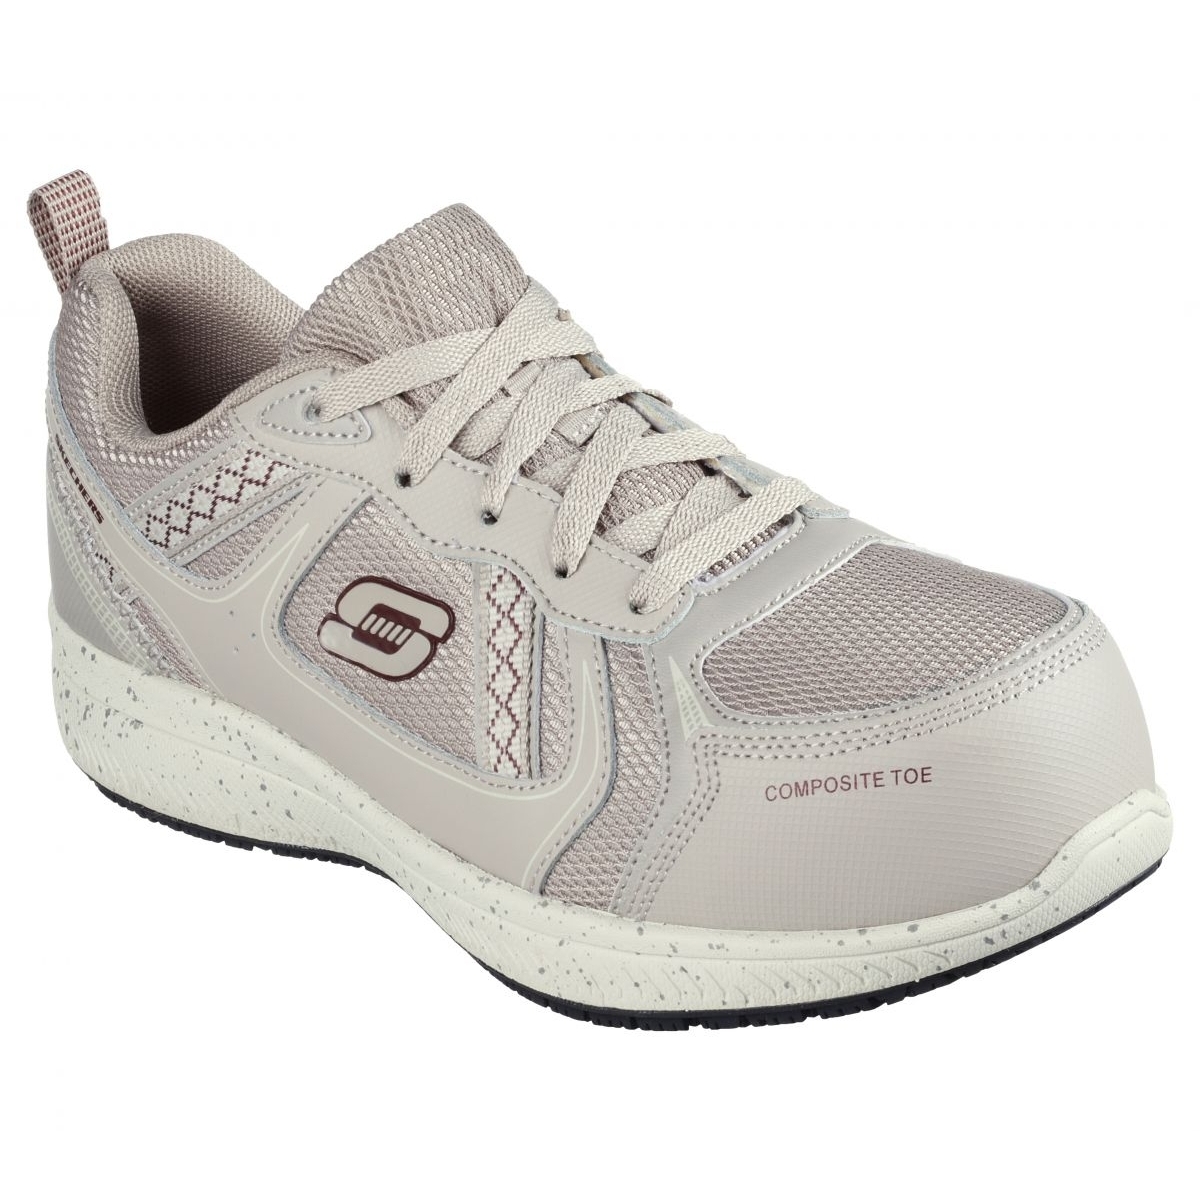 Skechers ELG-5 - Composite Toe TAUPE - TAUPE, 9